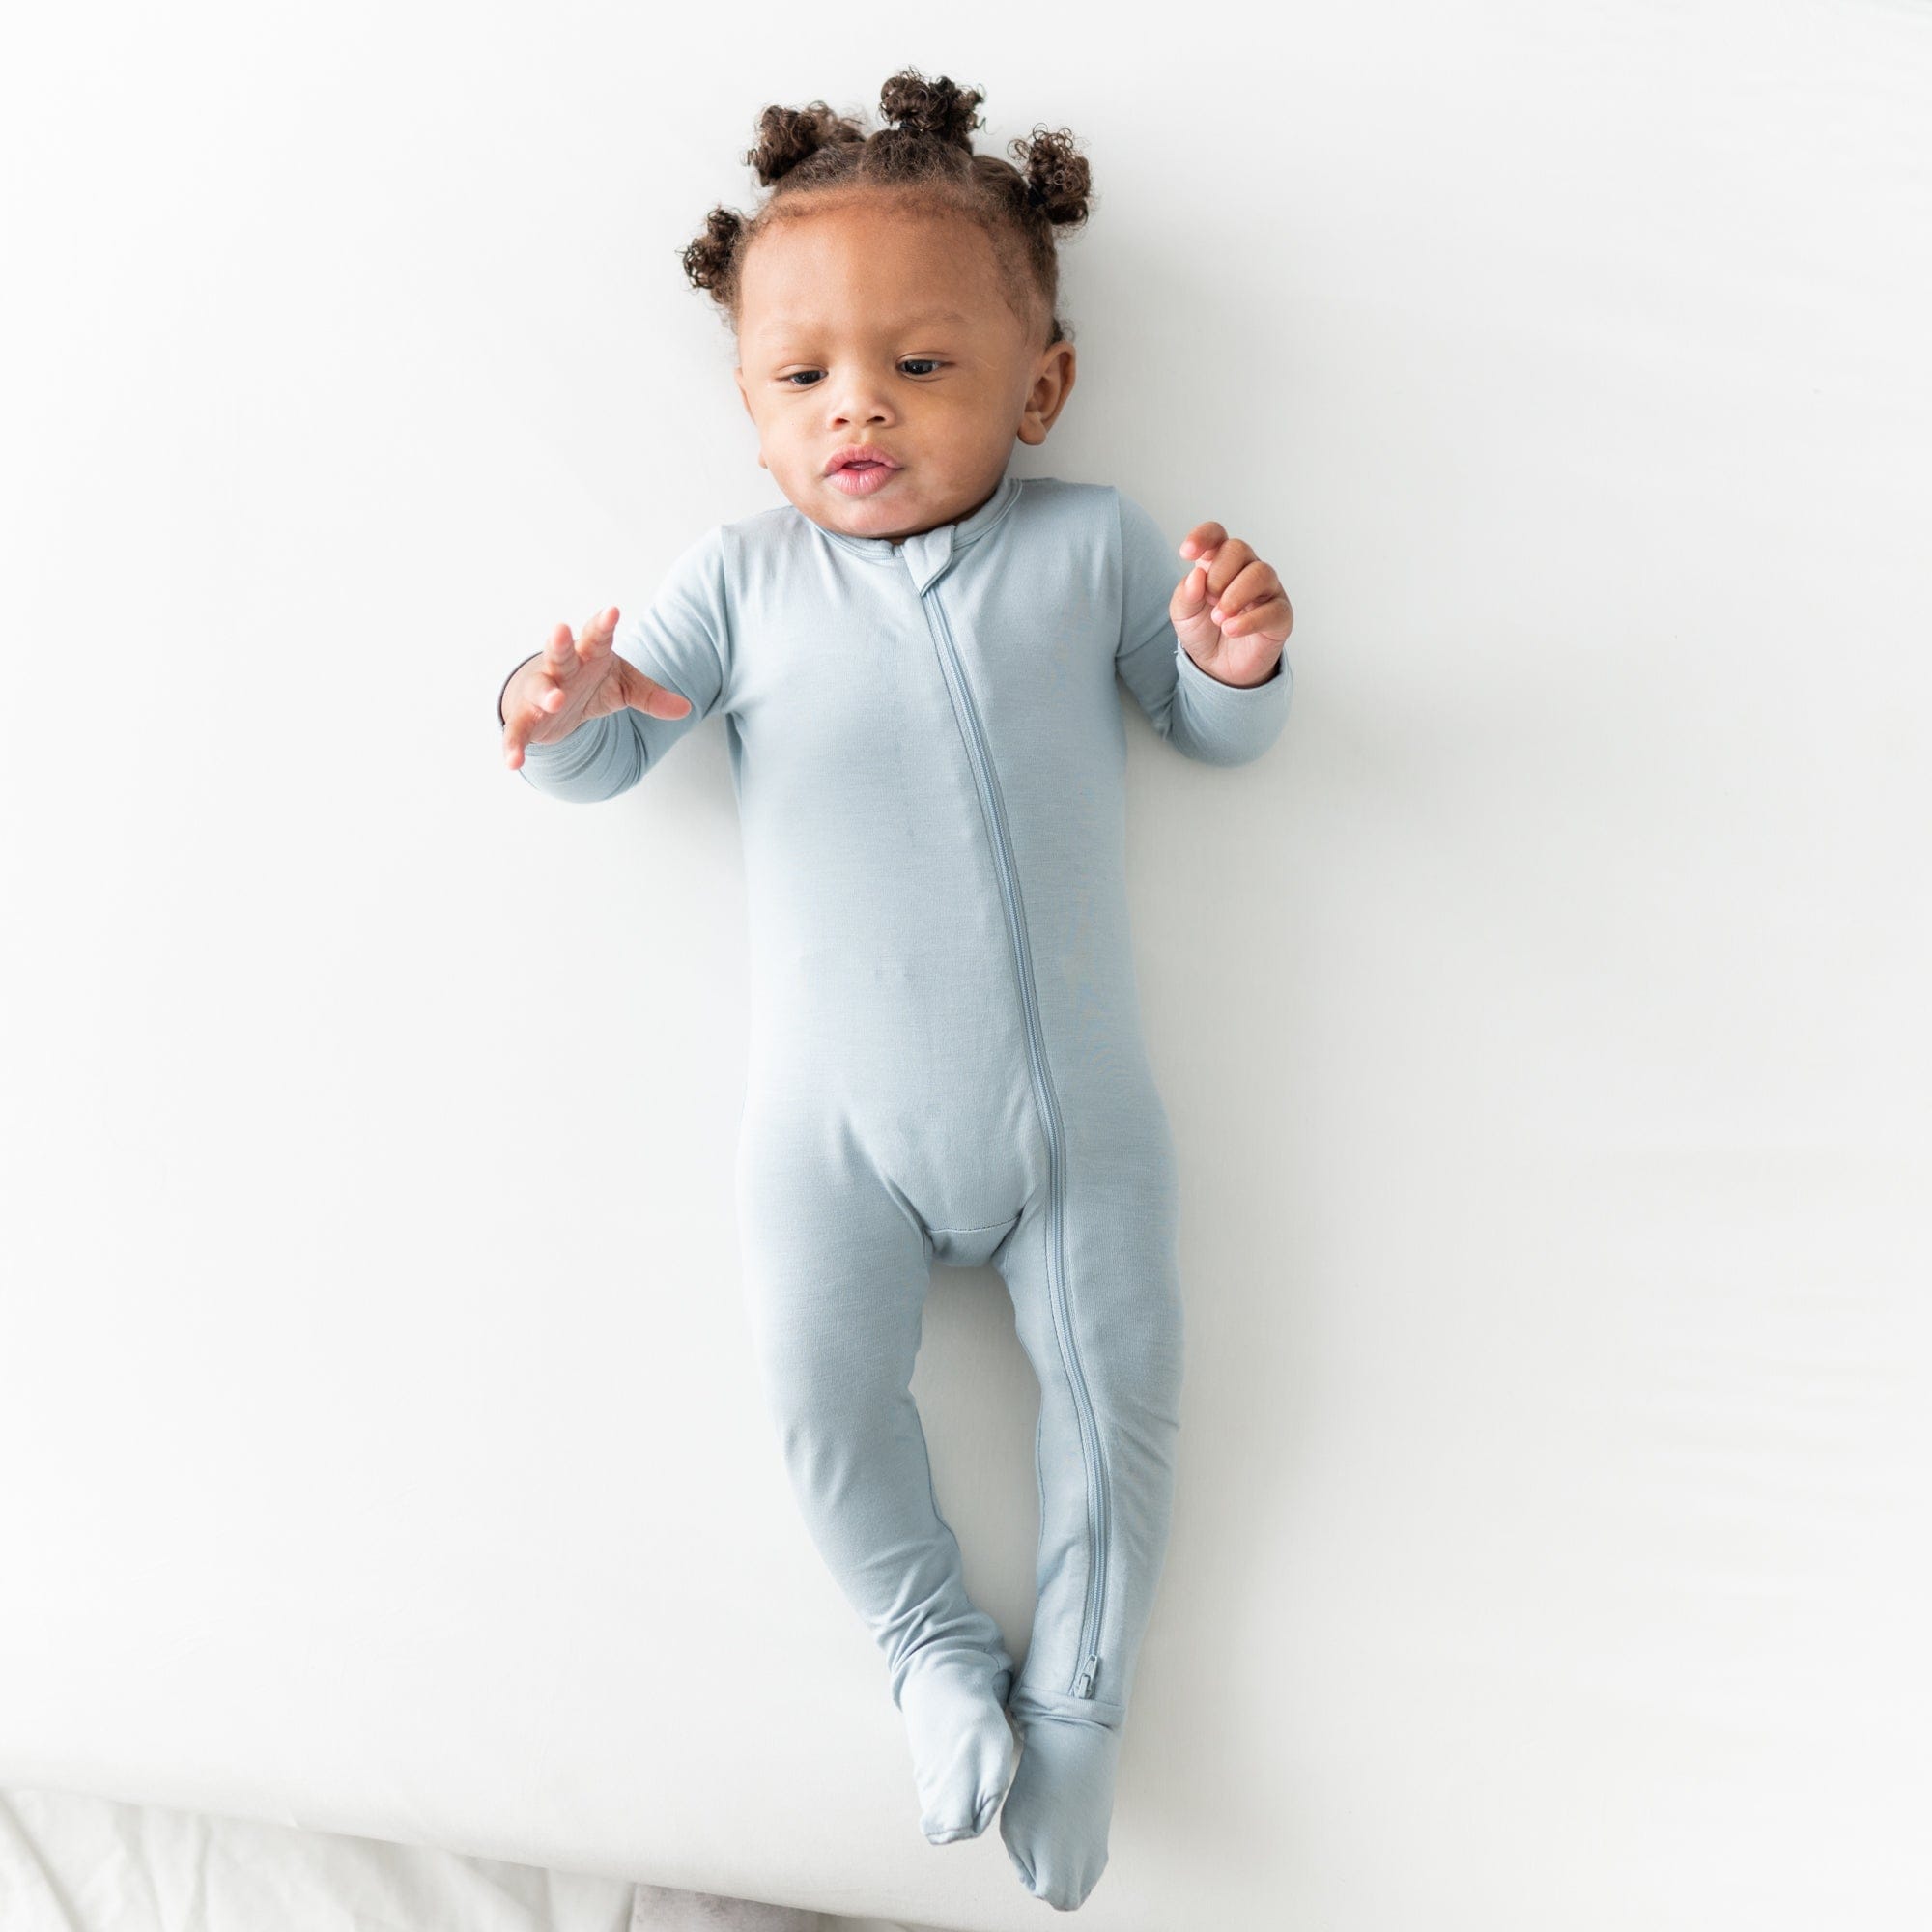 Baby wearing Kyte Baby breathable bamboo Zippered Footie in Fog